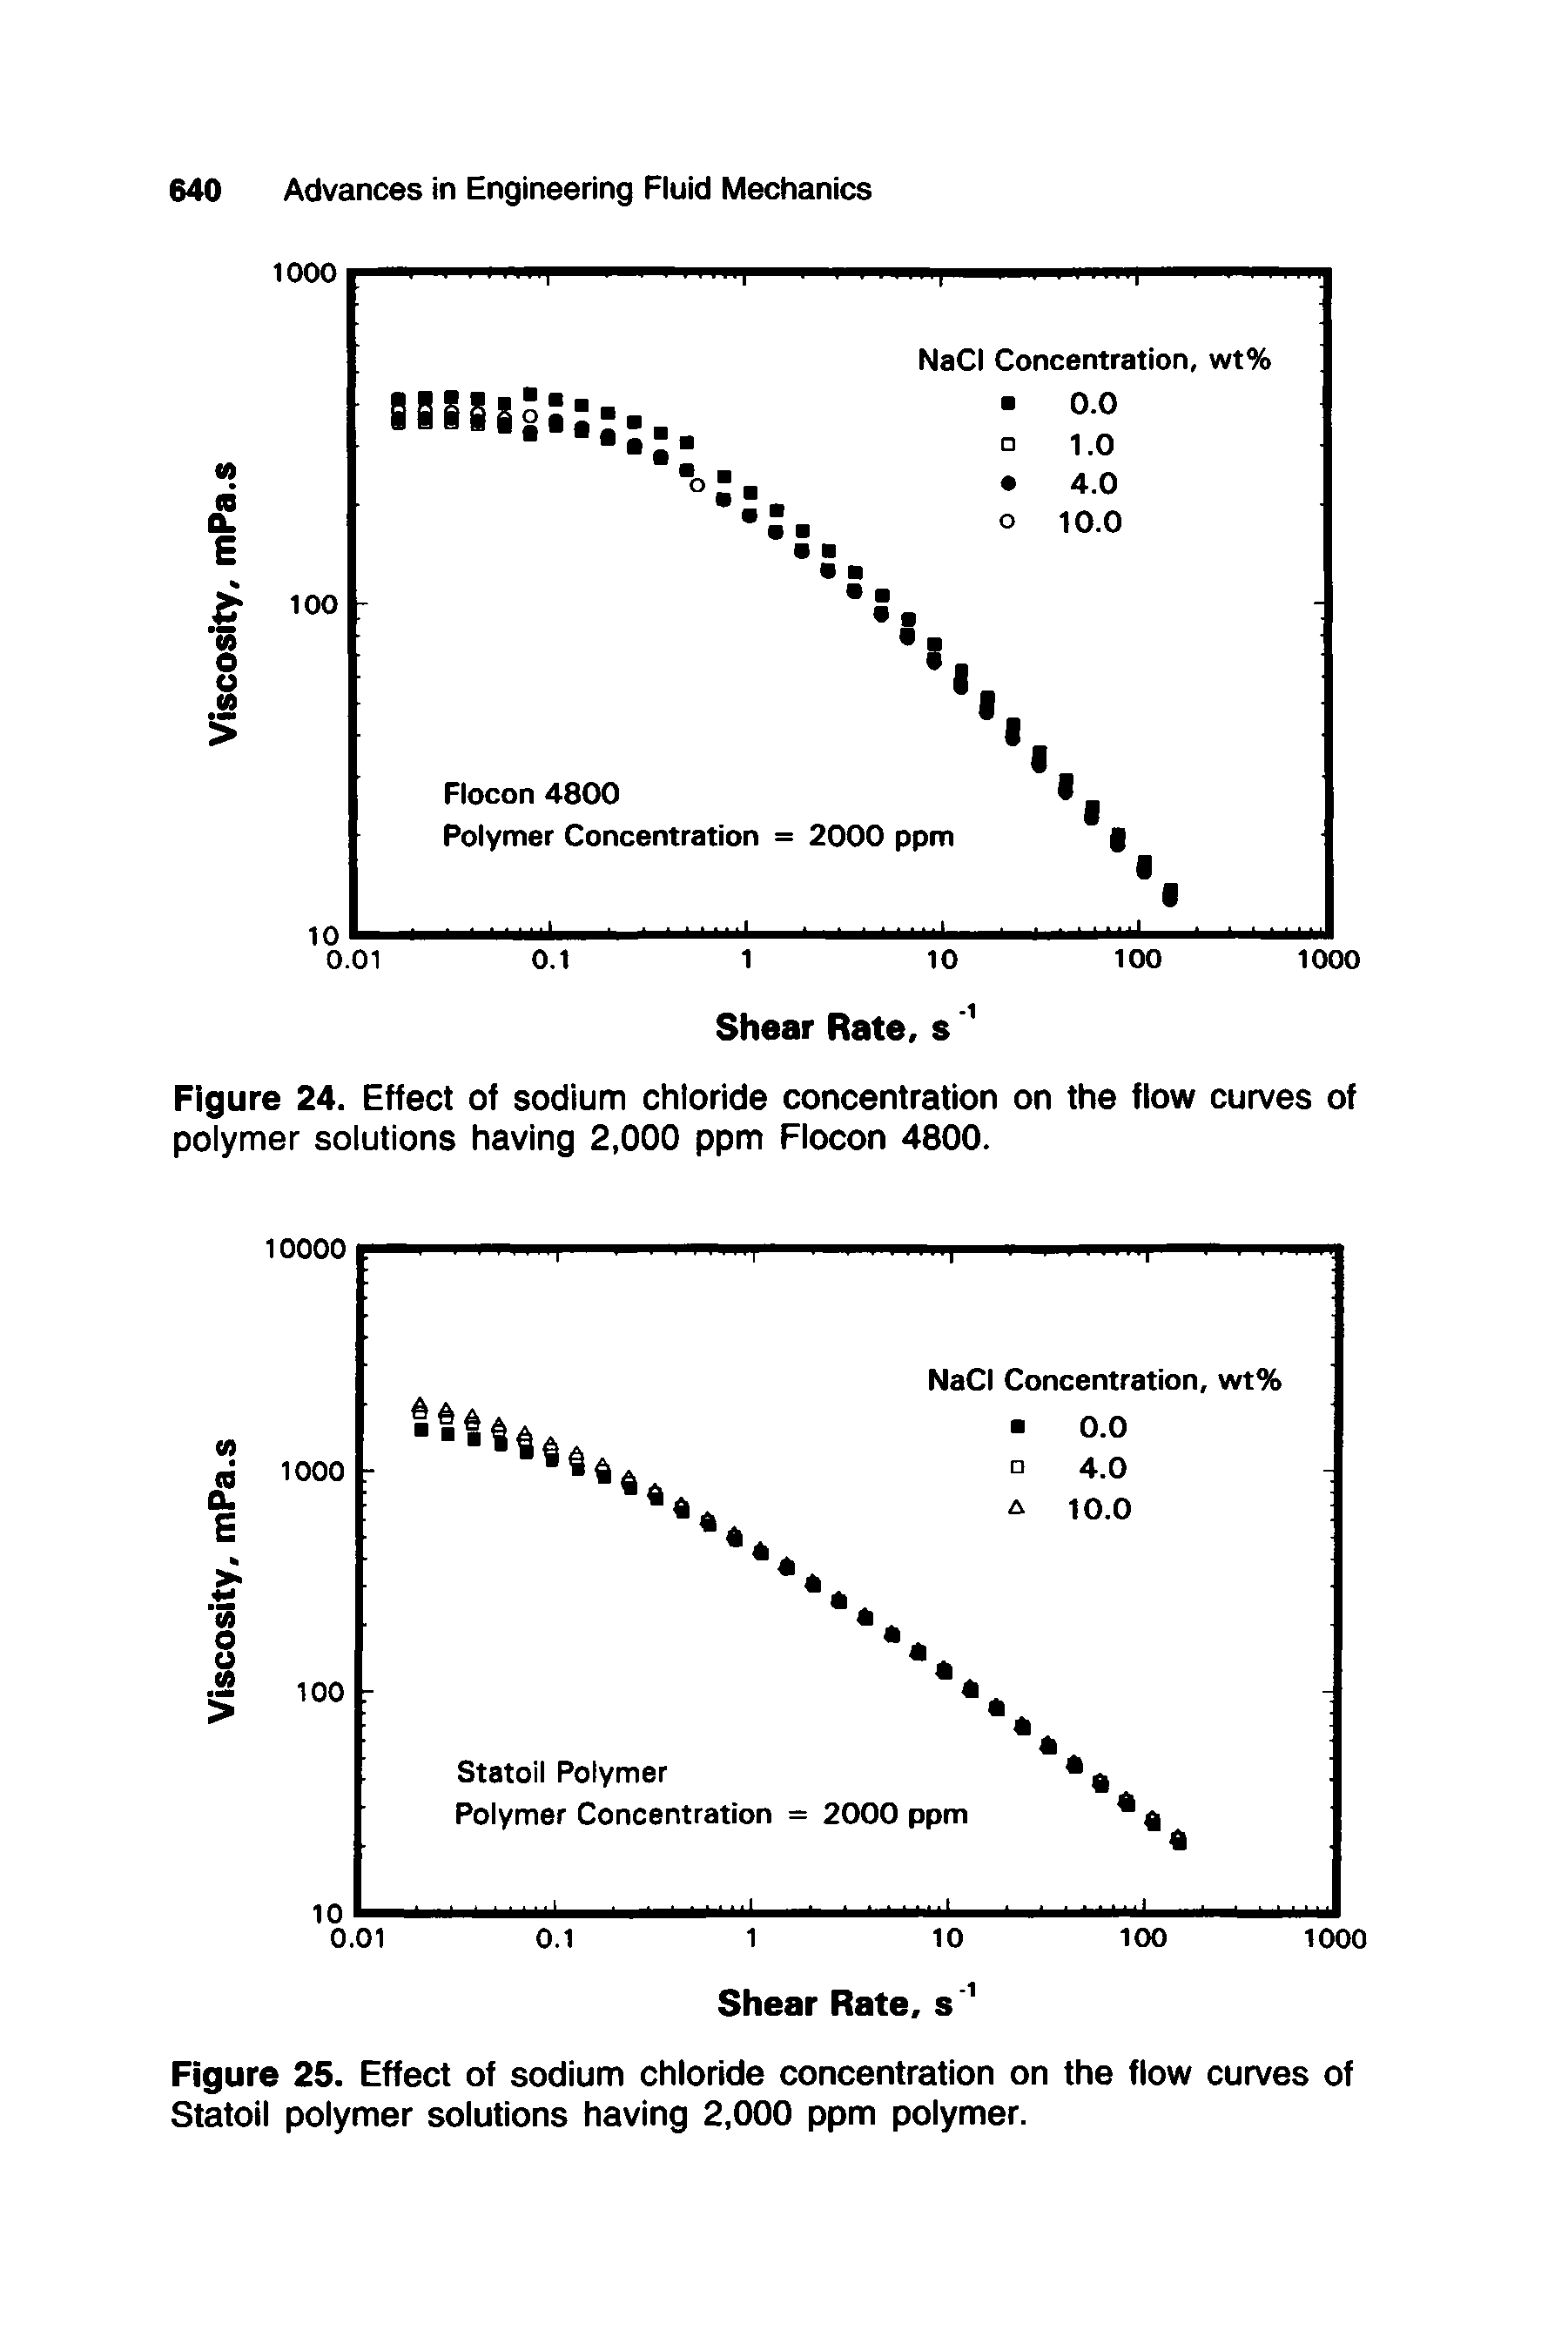 Figure 24. Effect of sodium chloride concentration on the flow curves of polymer solutions having 2,000 ppm Flocon 4800.